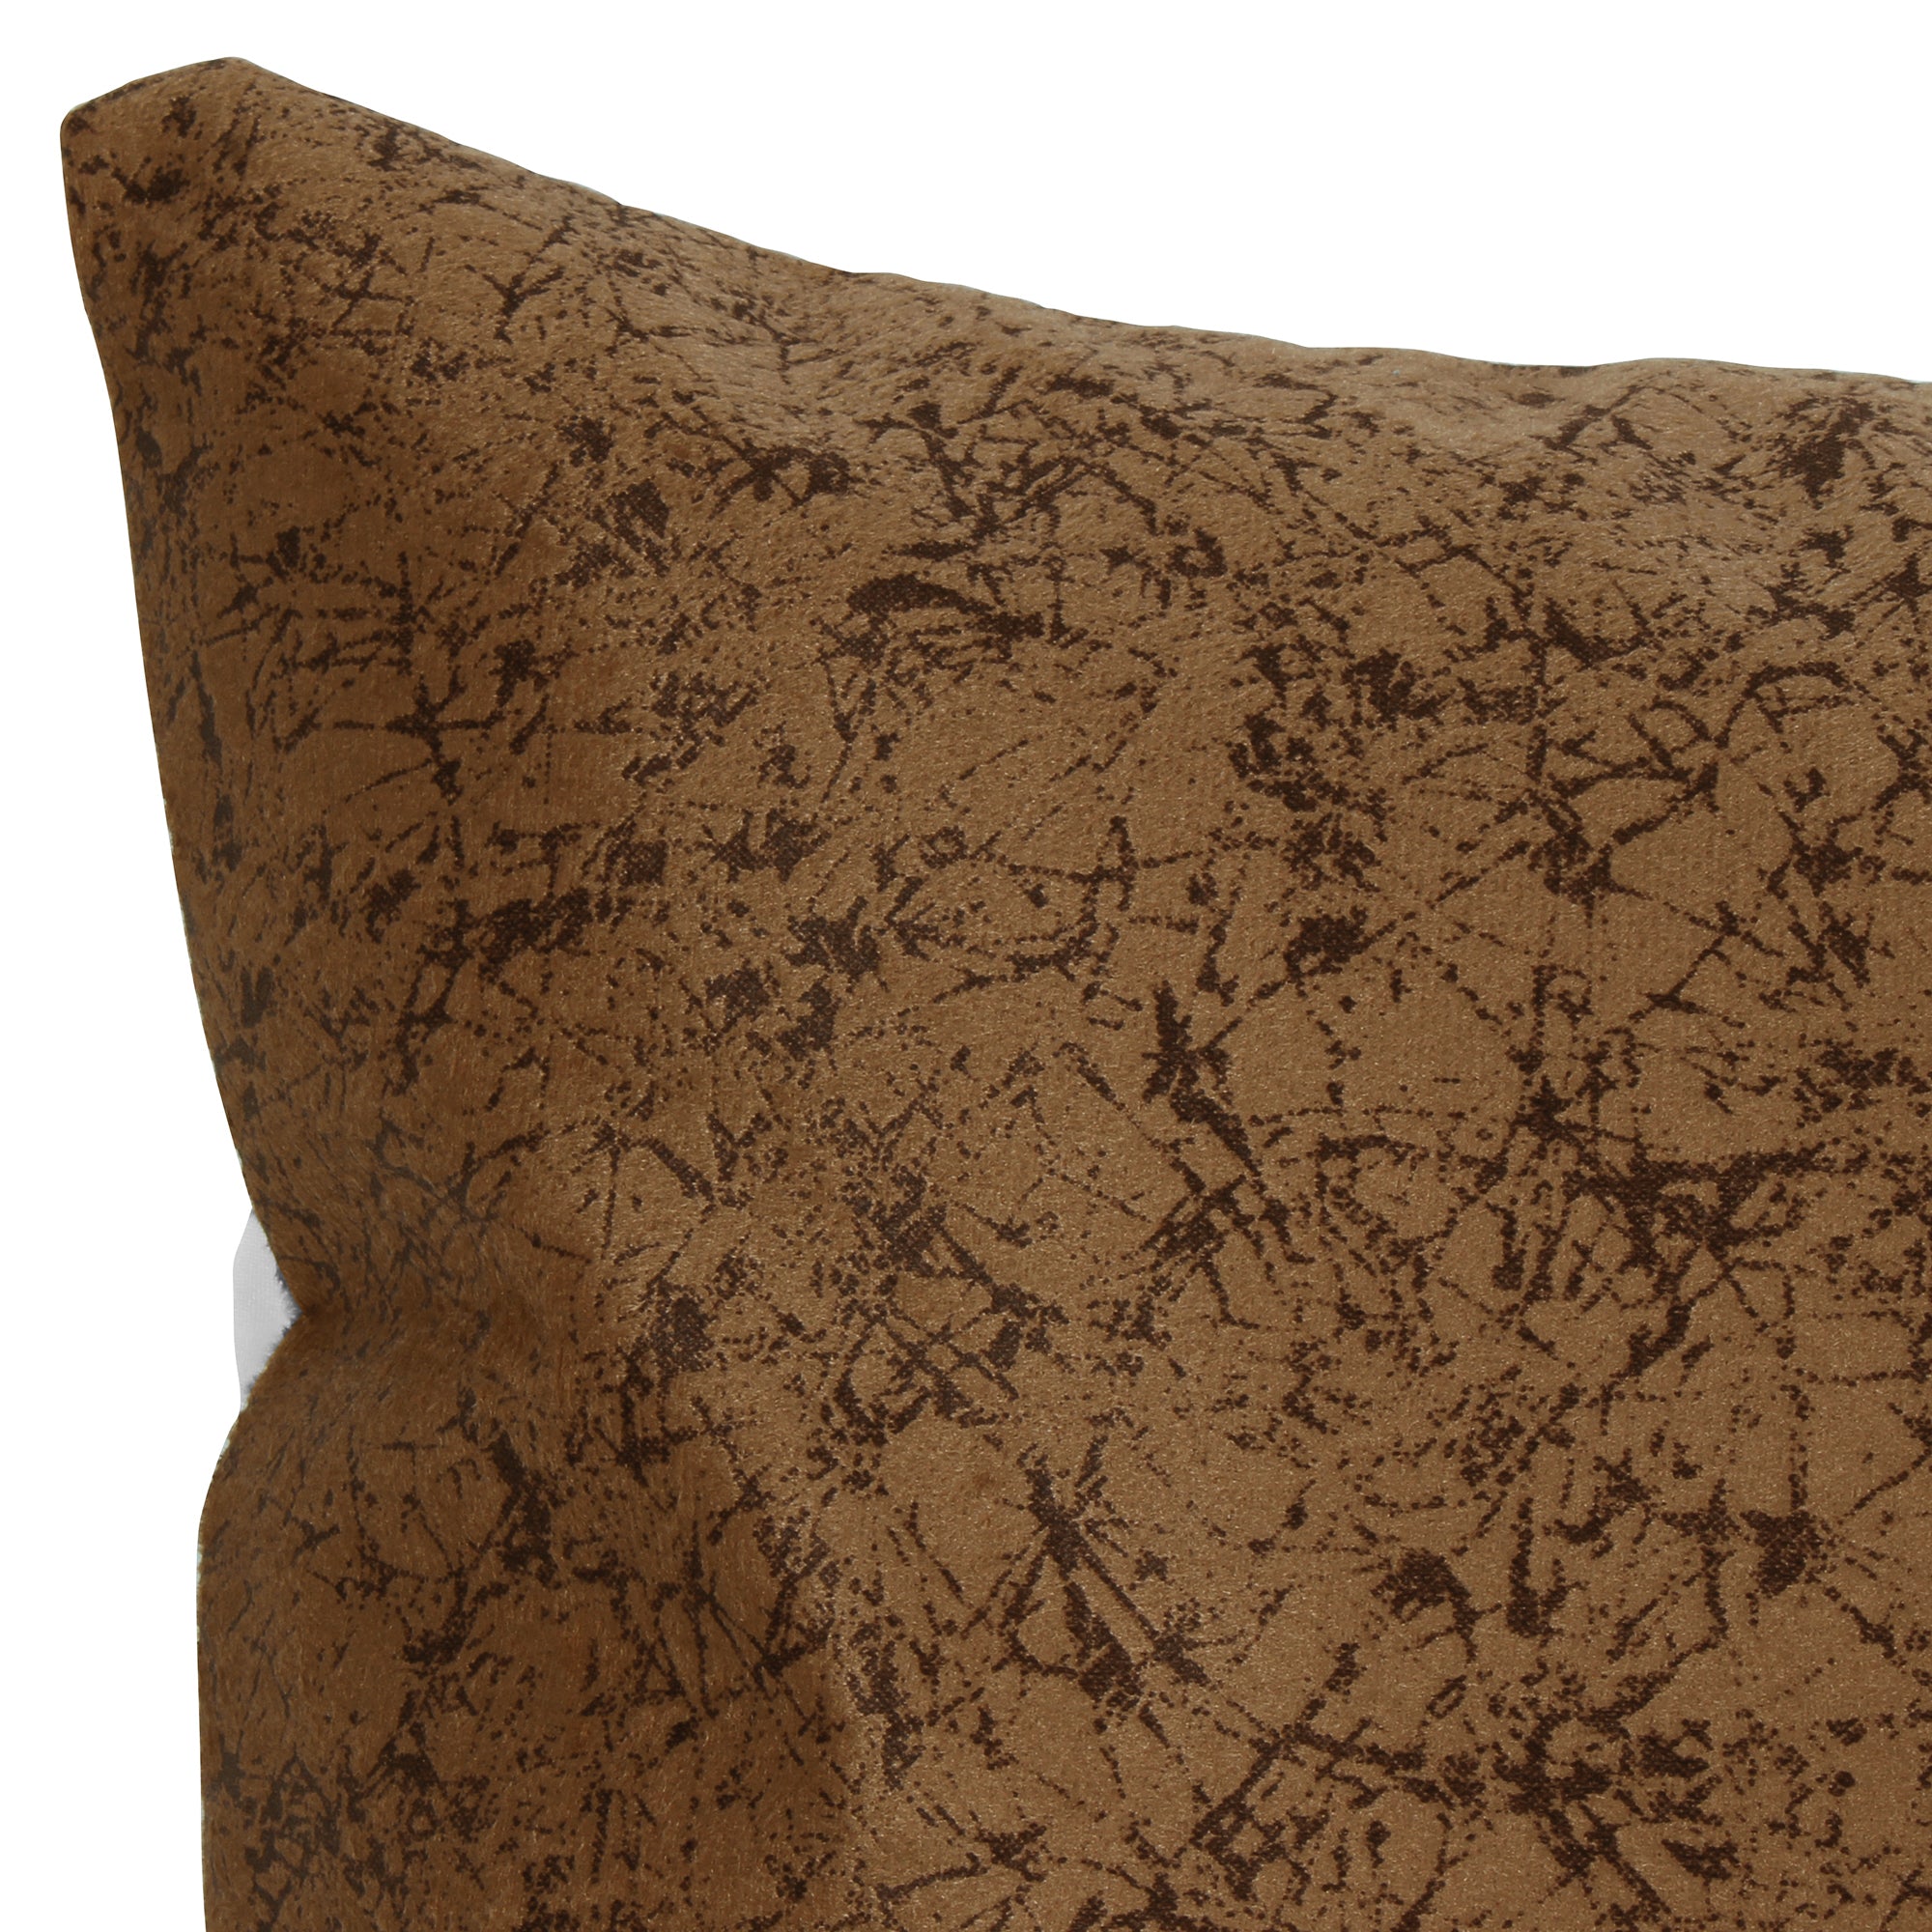 Story@Home Brick Brown Criss Cross Grunge Polyester 6 pcs of Alegra Cushion Covers